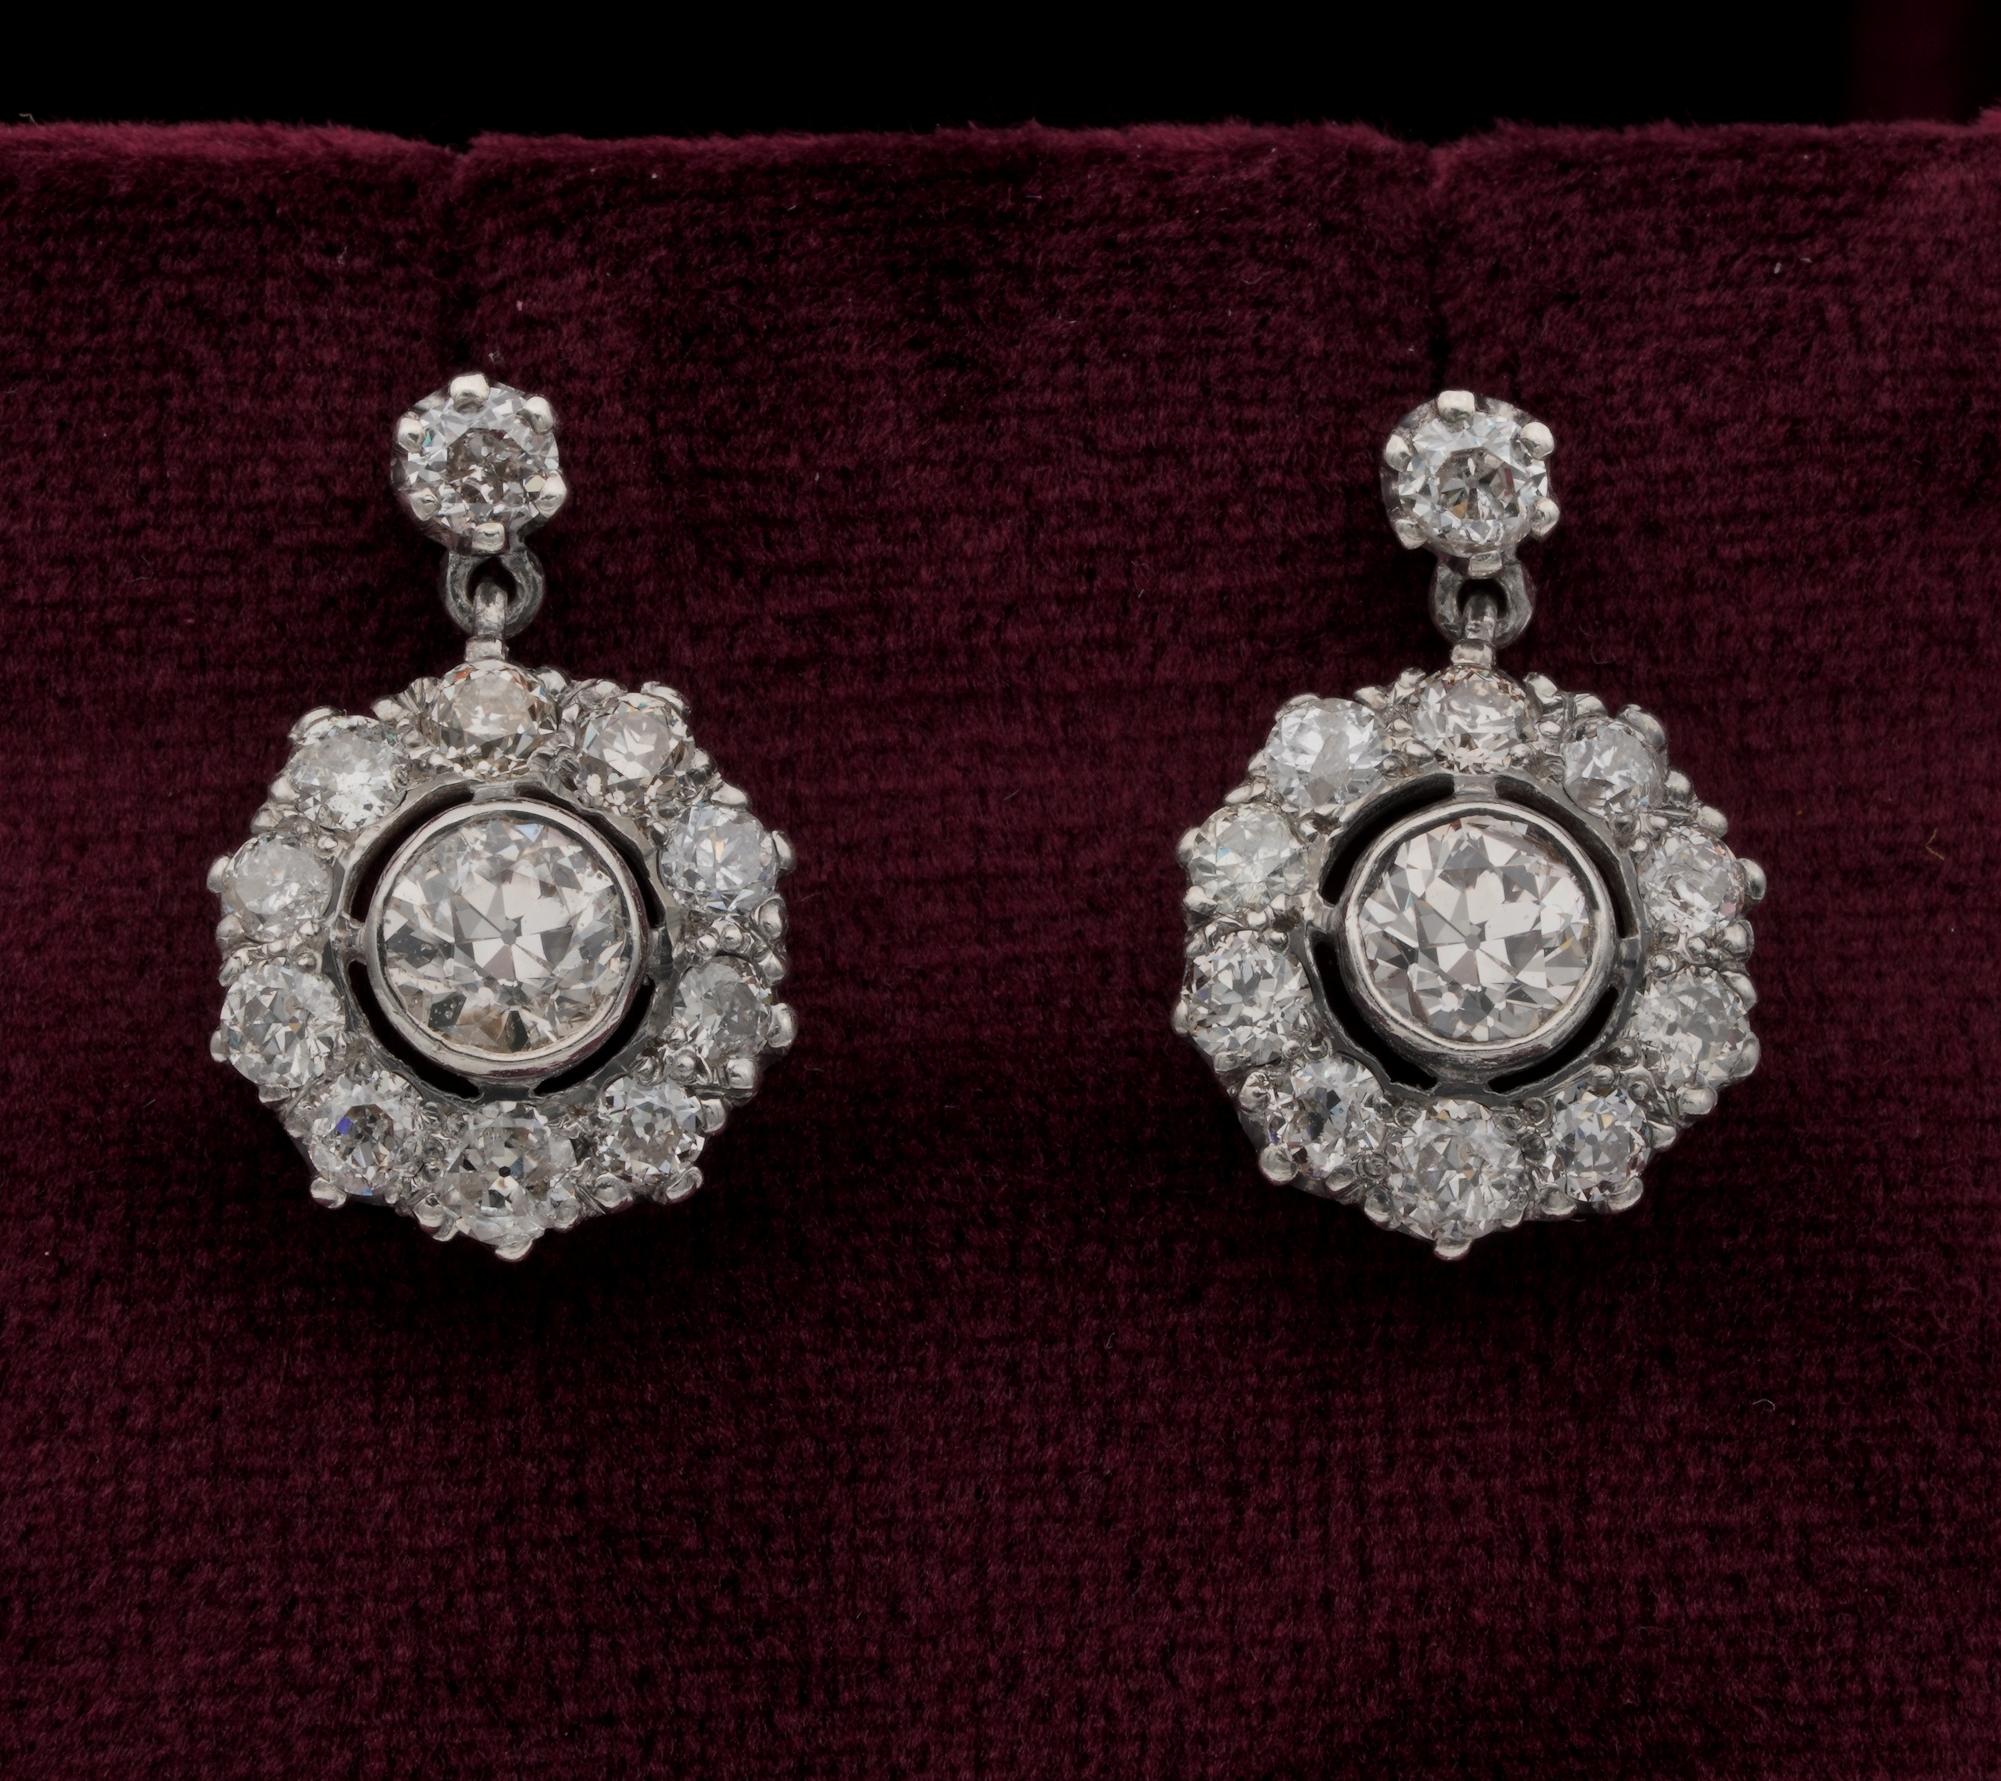 Edwardian dream for all day long!

Bright your ears with something of sensationally beautiful catching the attention for the amazing glisten!
A wonderful pair of authentic Edwardian classic floret design, cluster earrings, dating back to 1900